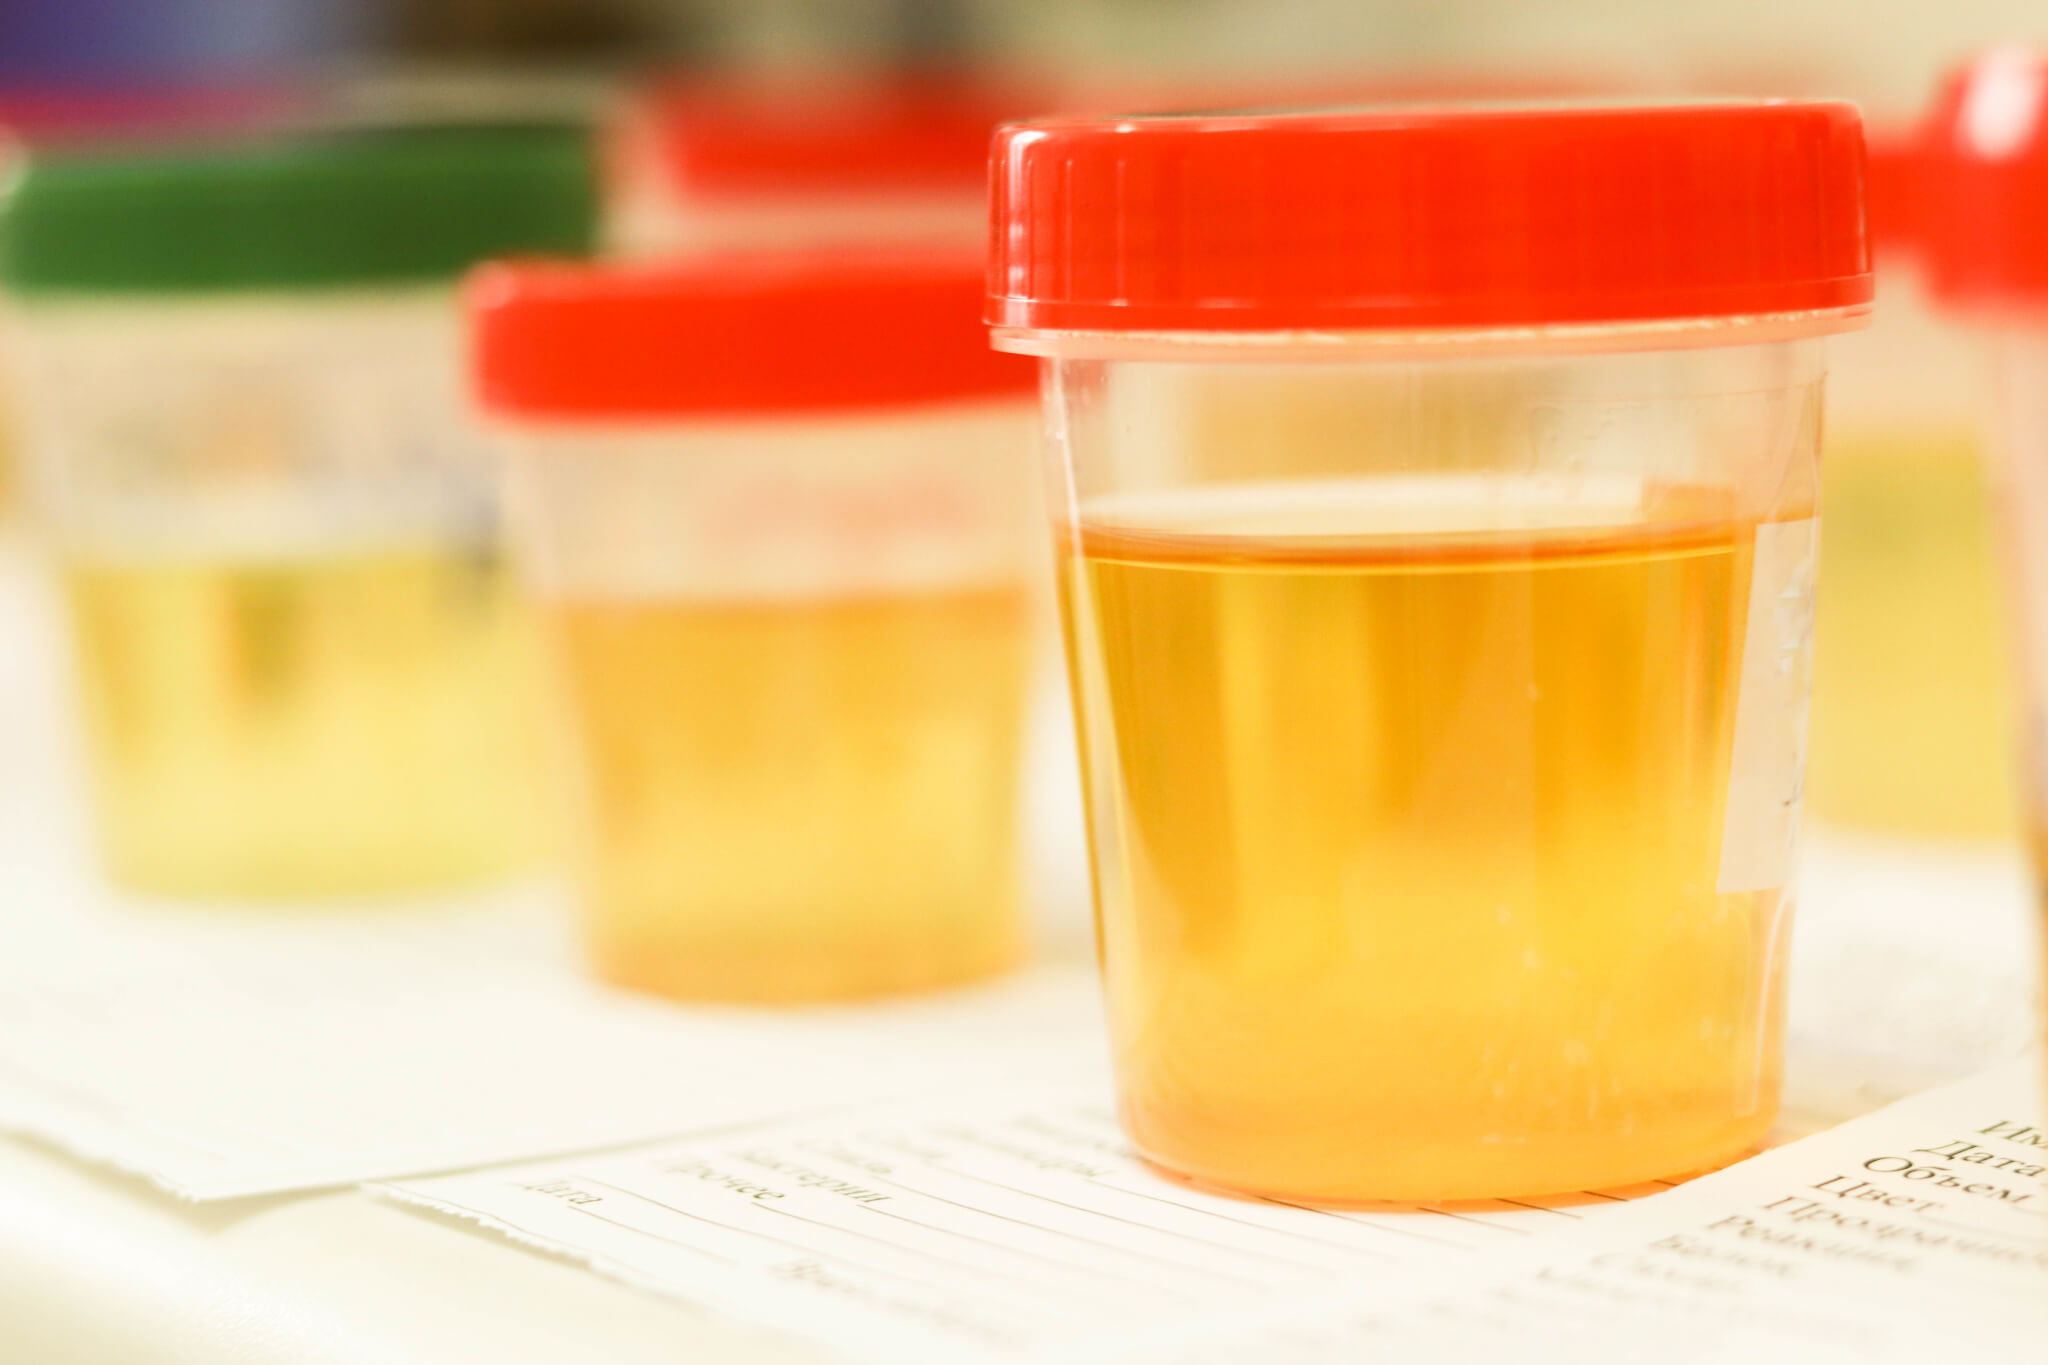 New urine test can predict onset of bladder cancer years before symptoms appear